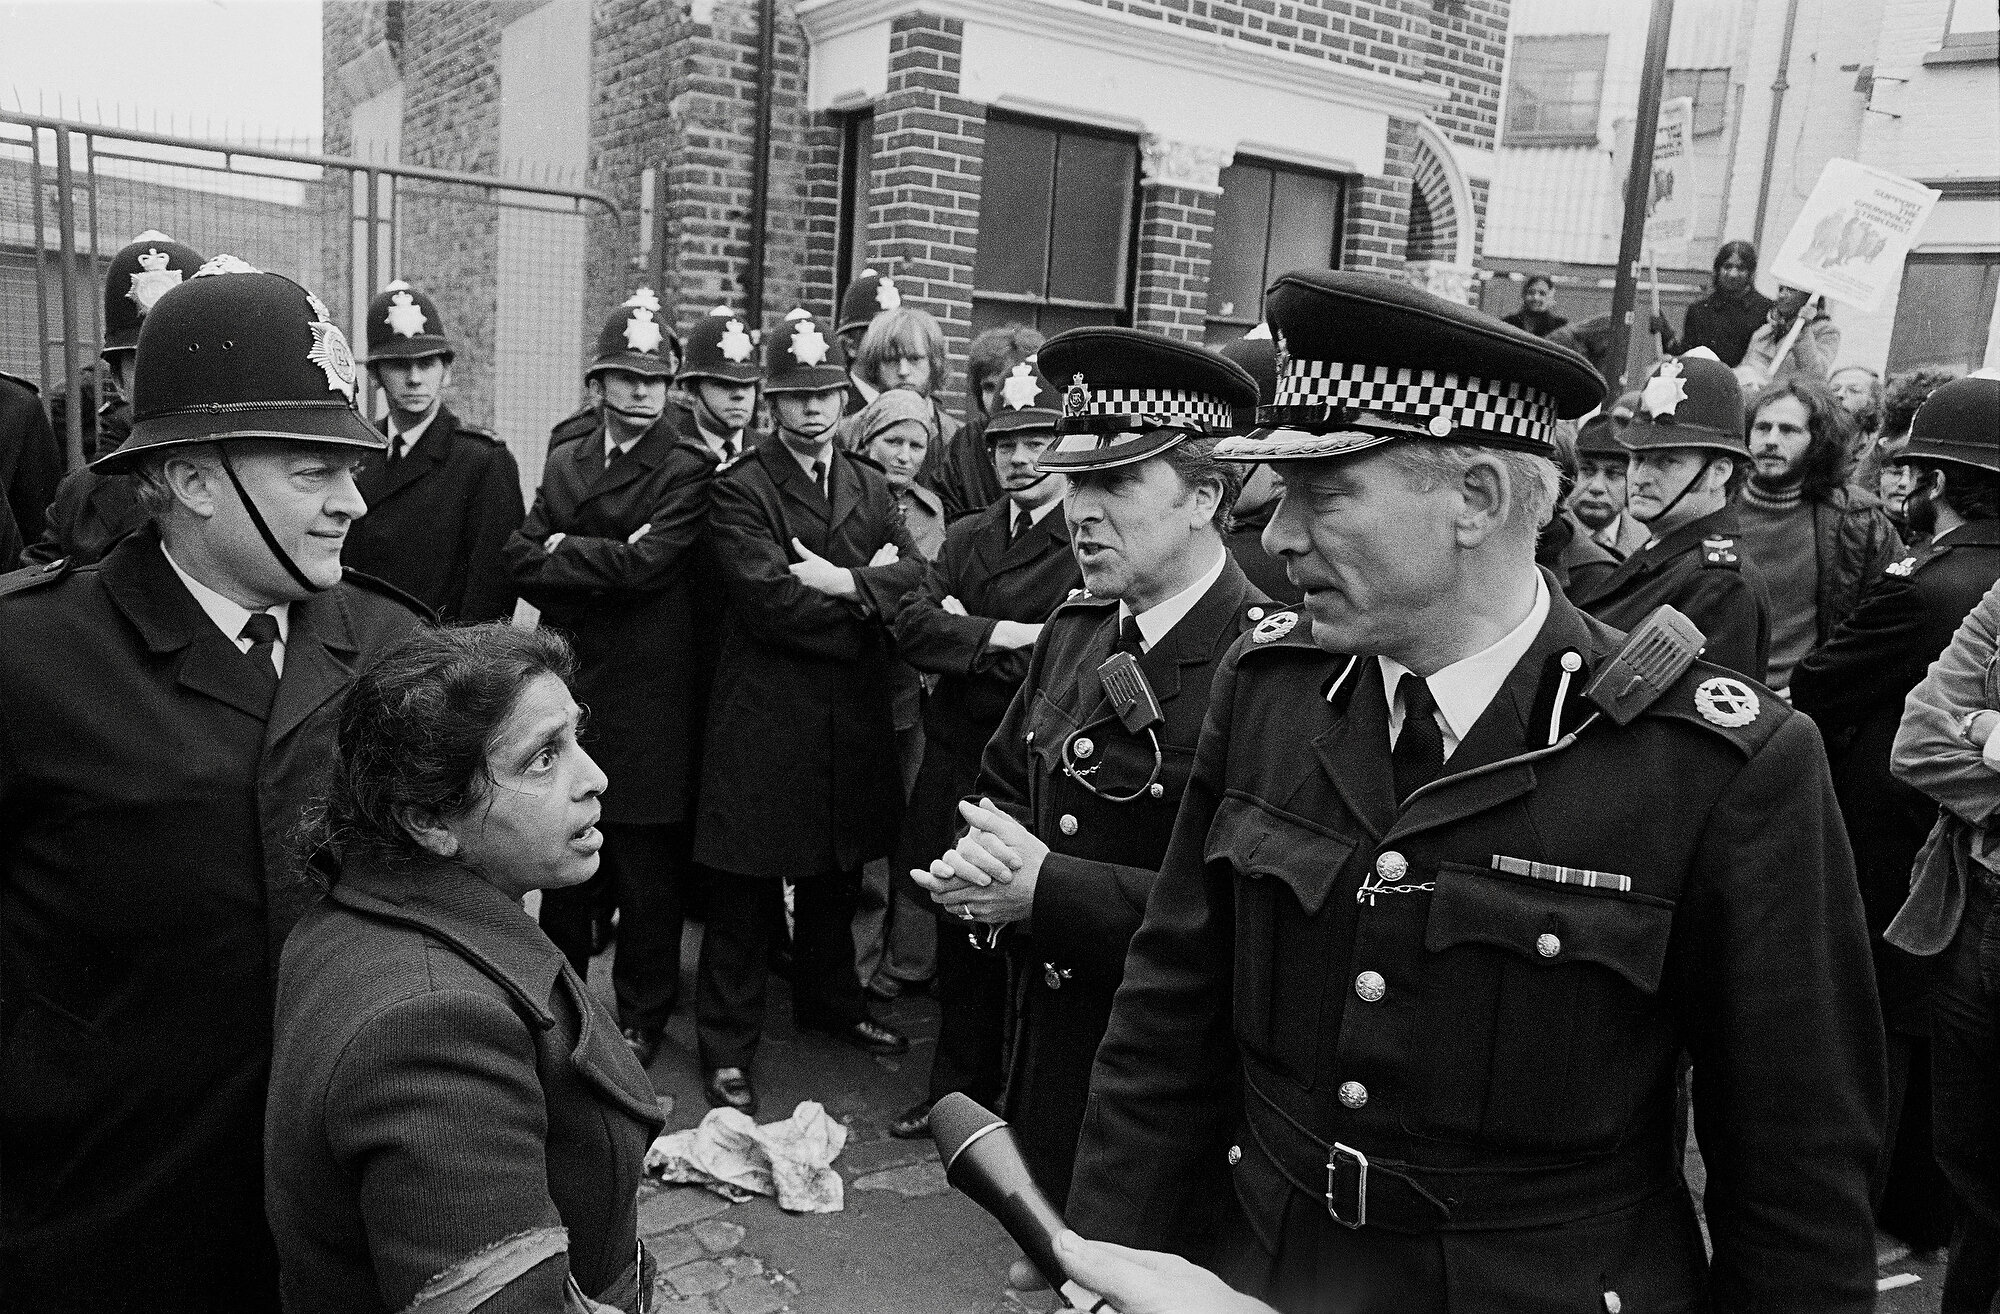  Jayaben Desai, a leader of a small band of strikers fighting the Grunwick film processing company for union recognition, is confronted by senior Police officers outside the company’s premises in Dollis Hill, London. Photo: Andrew Wiard, 13 June 1977